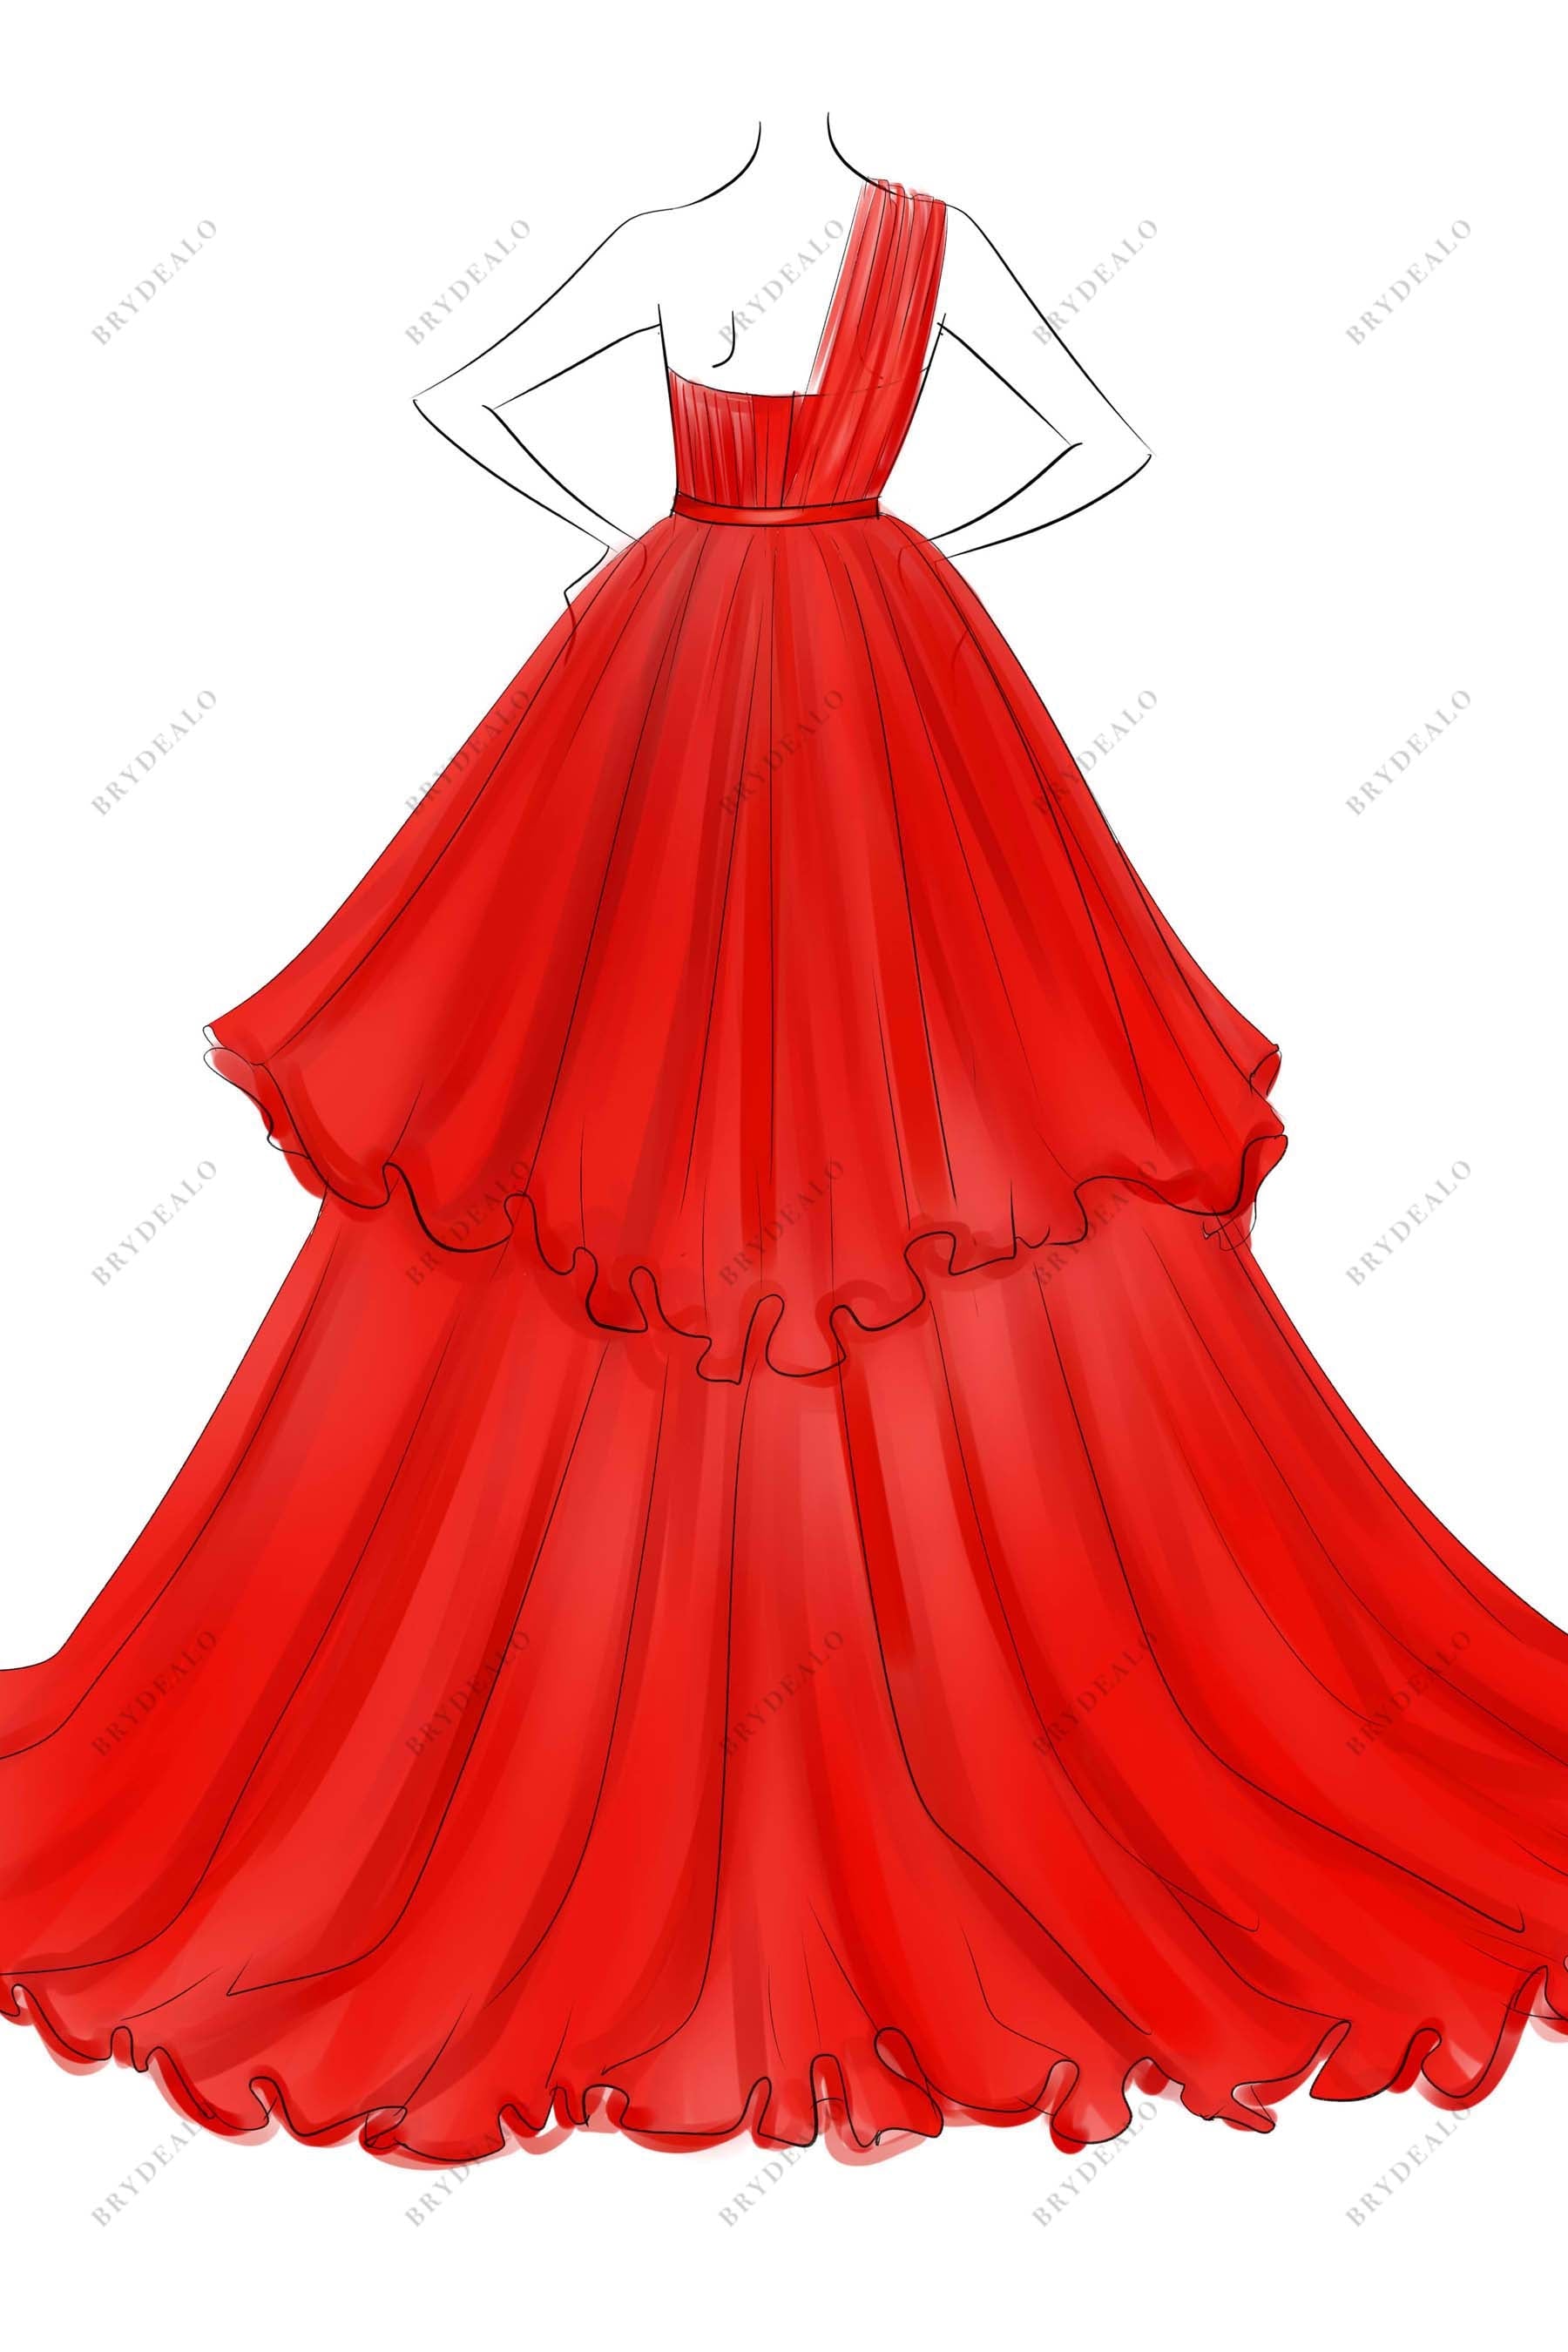 long train tiered A-line prom ball gown sketch